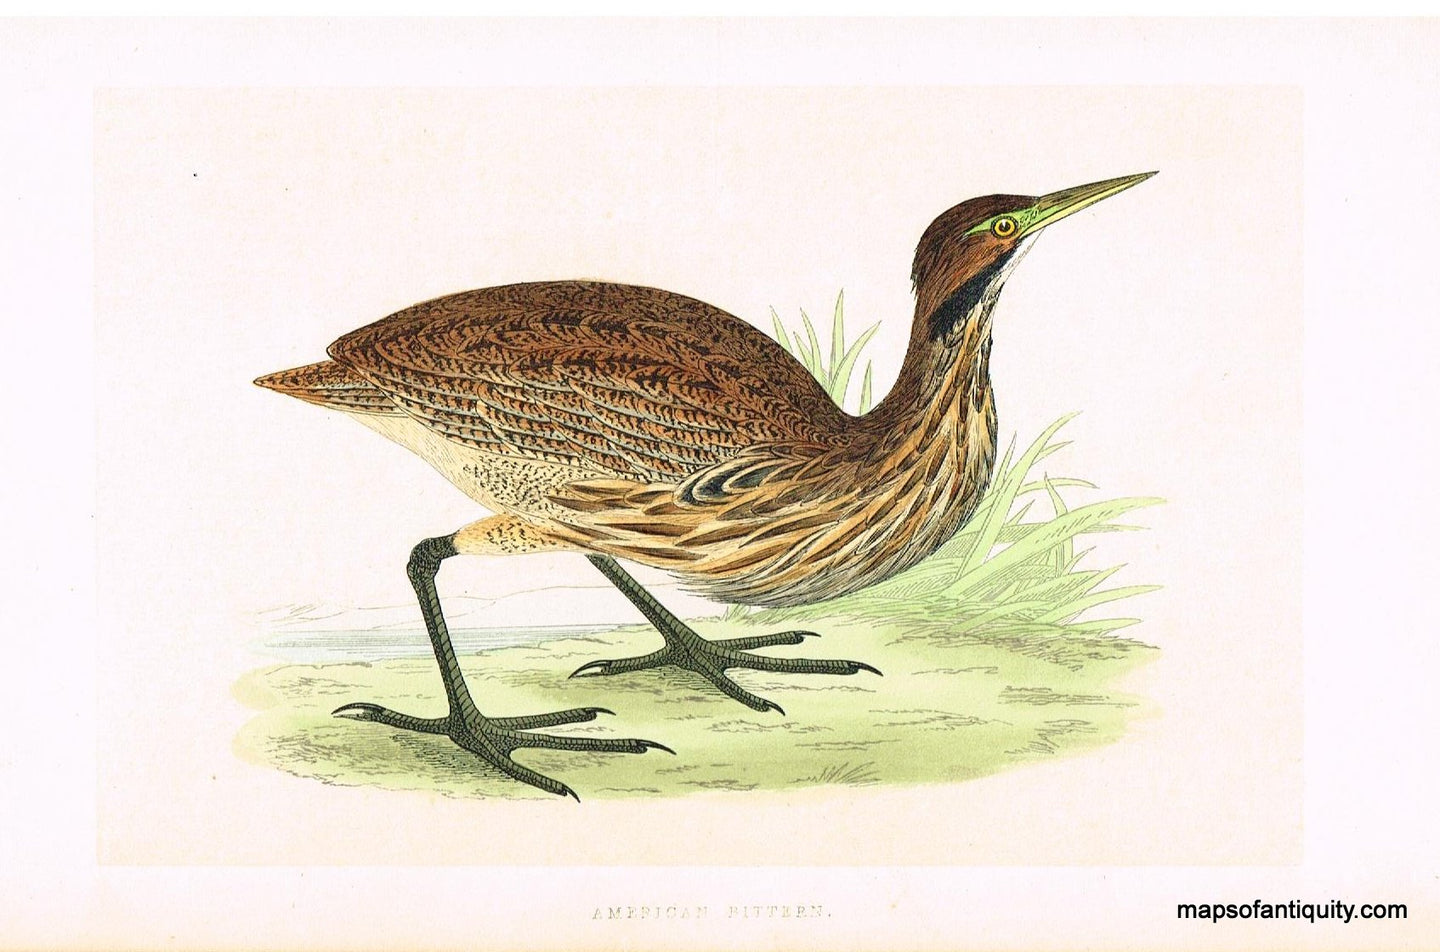 Antique-Hand-Colored-Engraved-Illustration-American-Bittern-Morris-bird-Natural-History-Birds-1851-Morris-Maps-Of-Antiquity